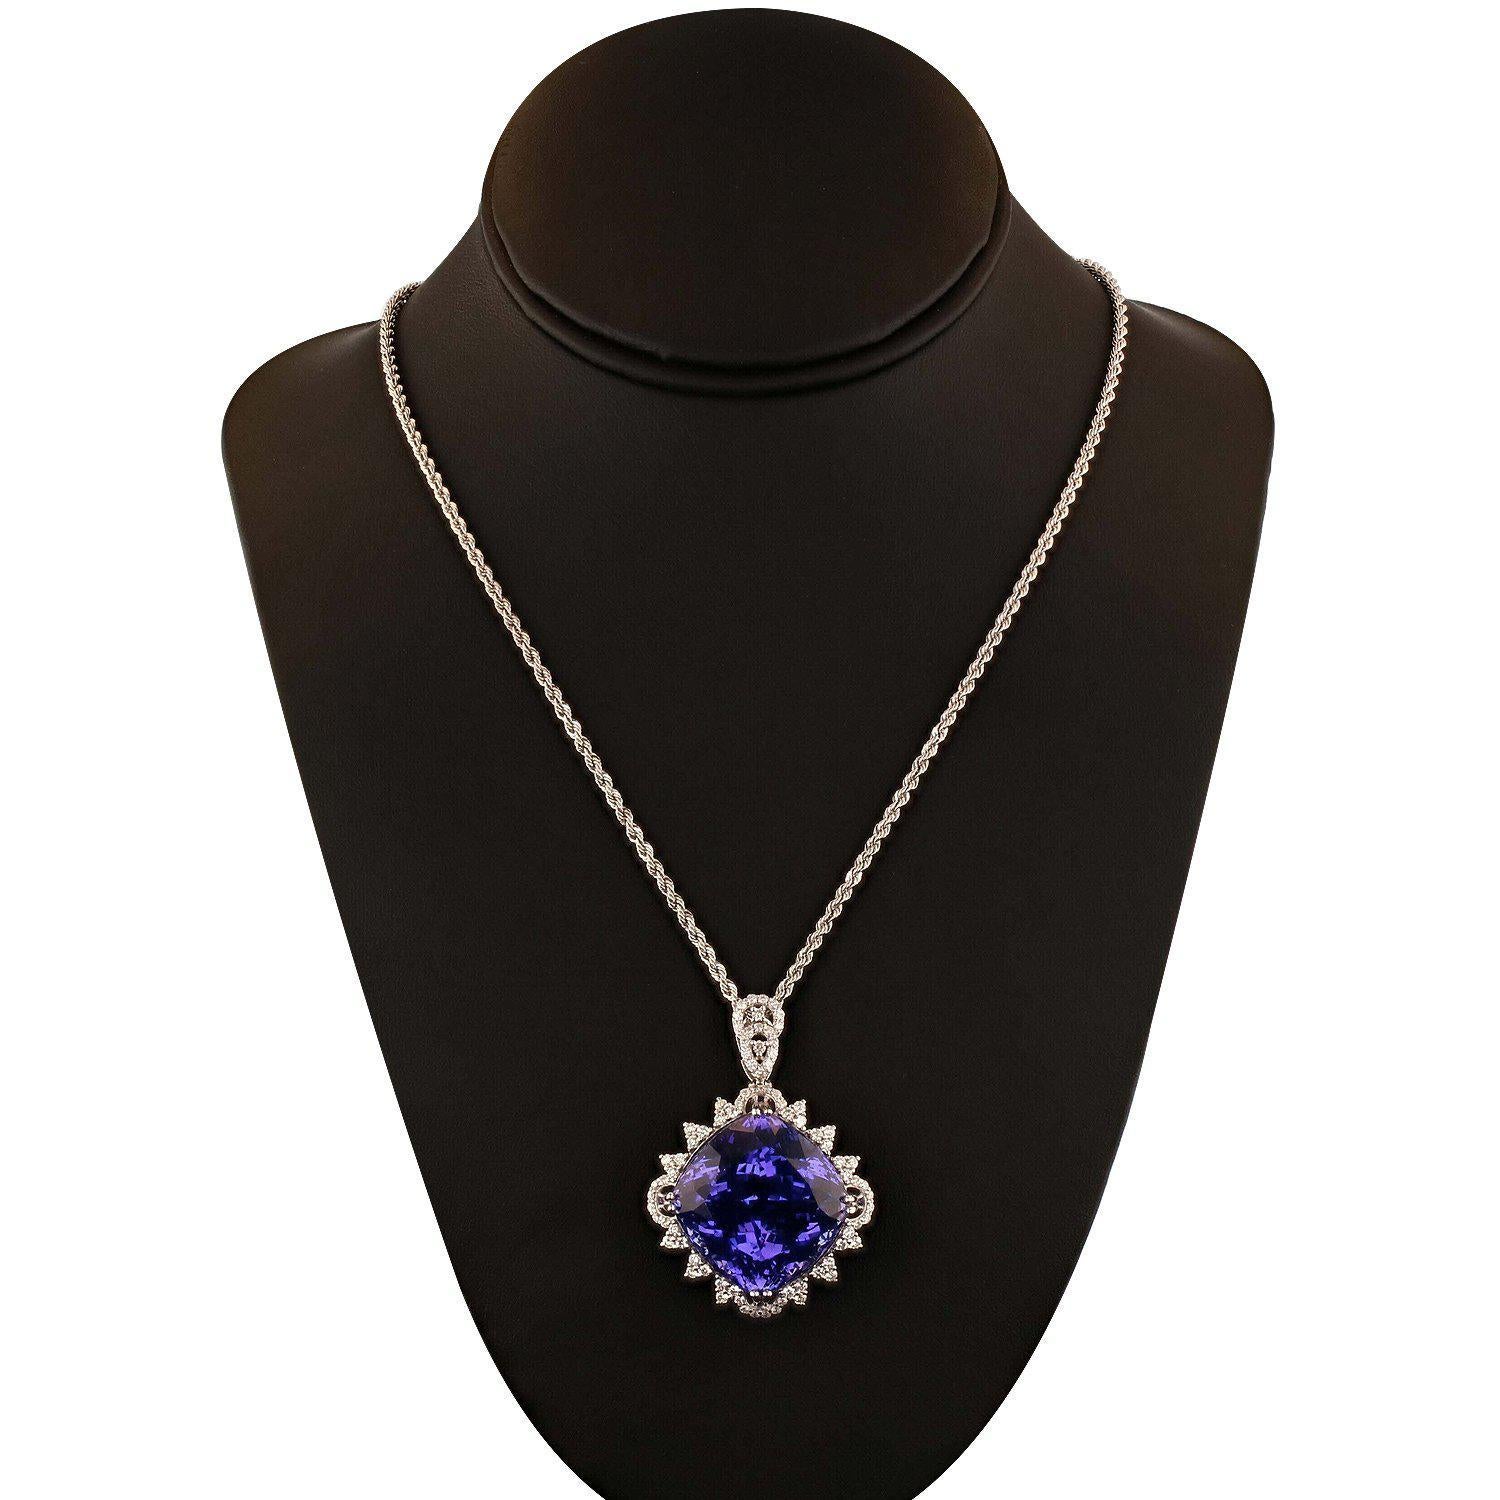 One electronically tested platinum ladies cast & assembled tanzanite & diamond pendant with chain. Condition is new, good workmanship. The pendant features a tanzanite set within a floret of diamond clusters, supported by a lattice under gallery,